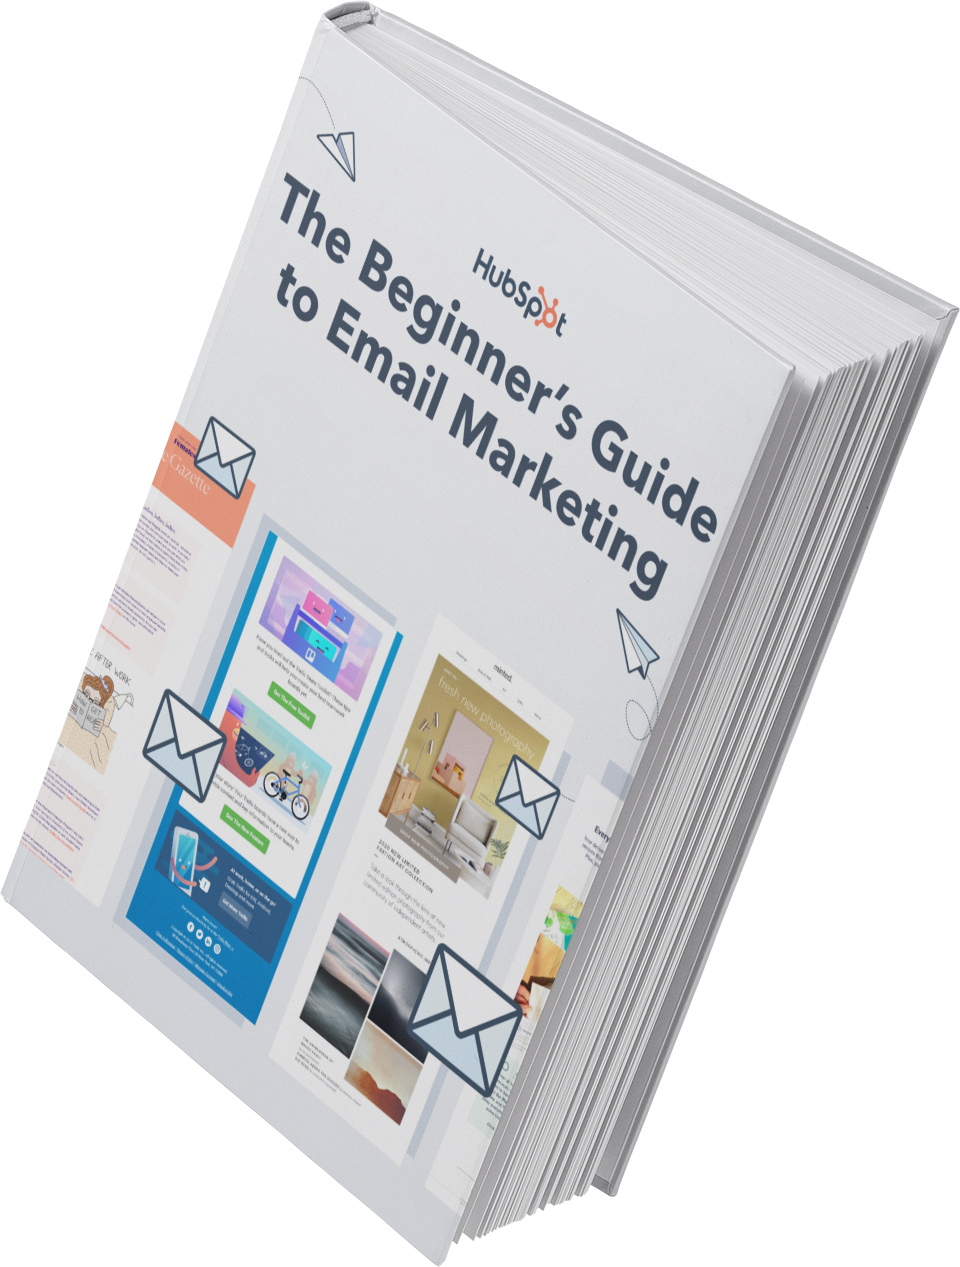 The Beginner's Guide to Email Marketing